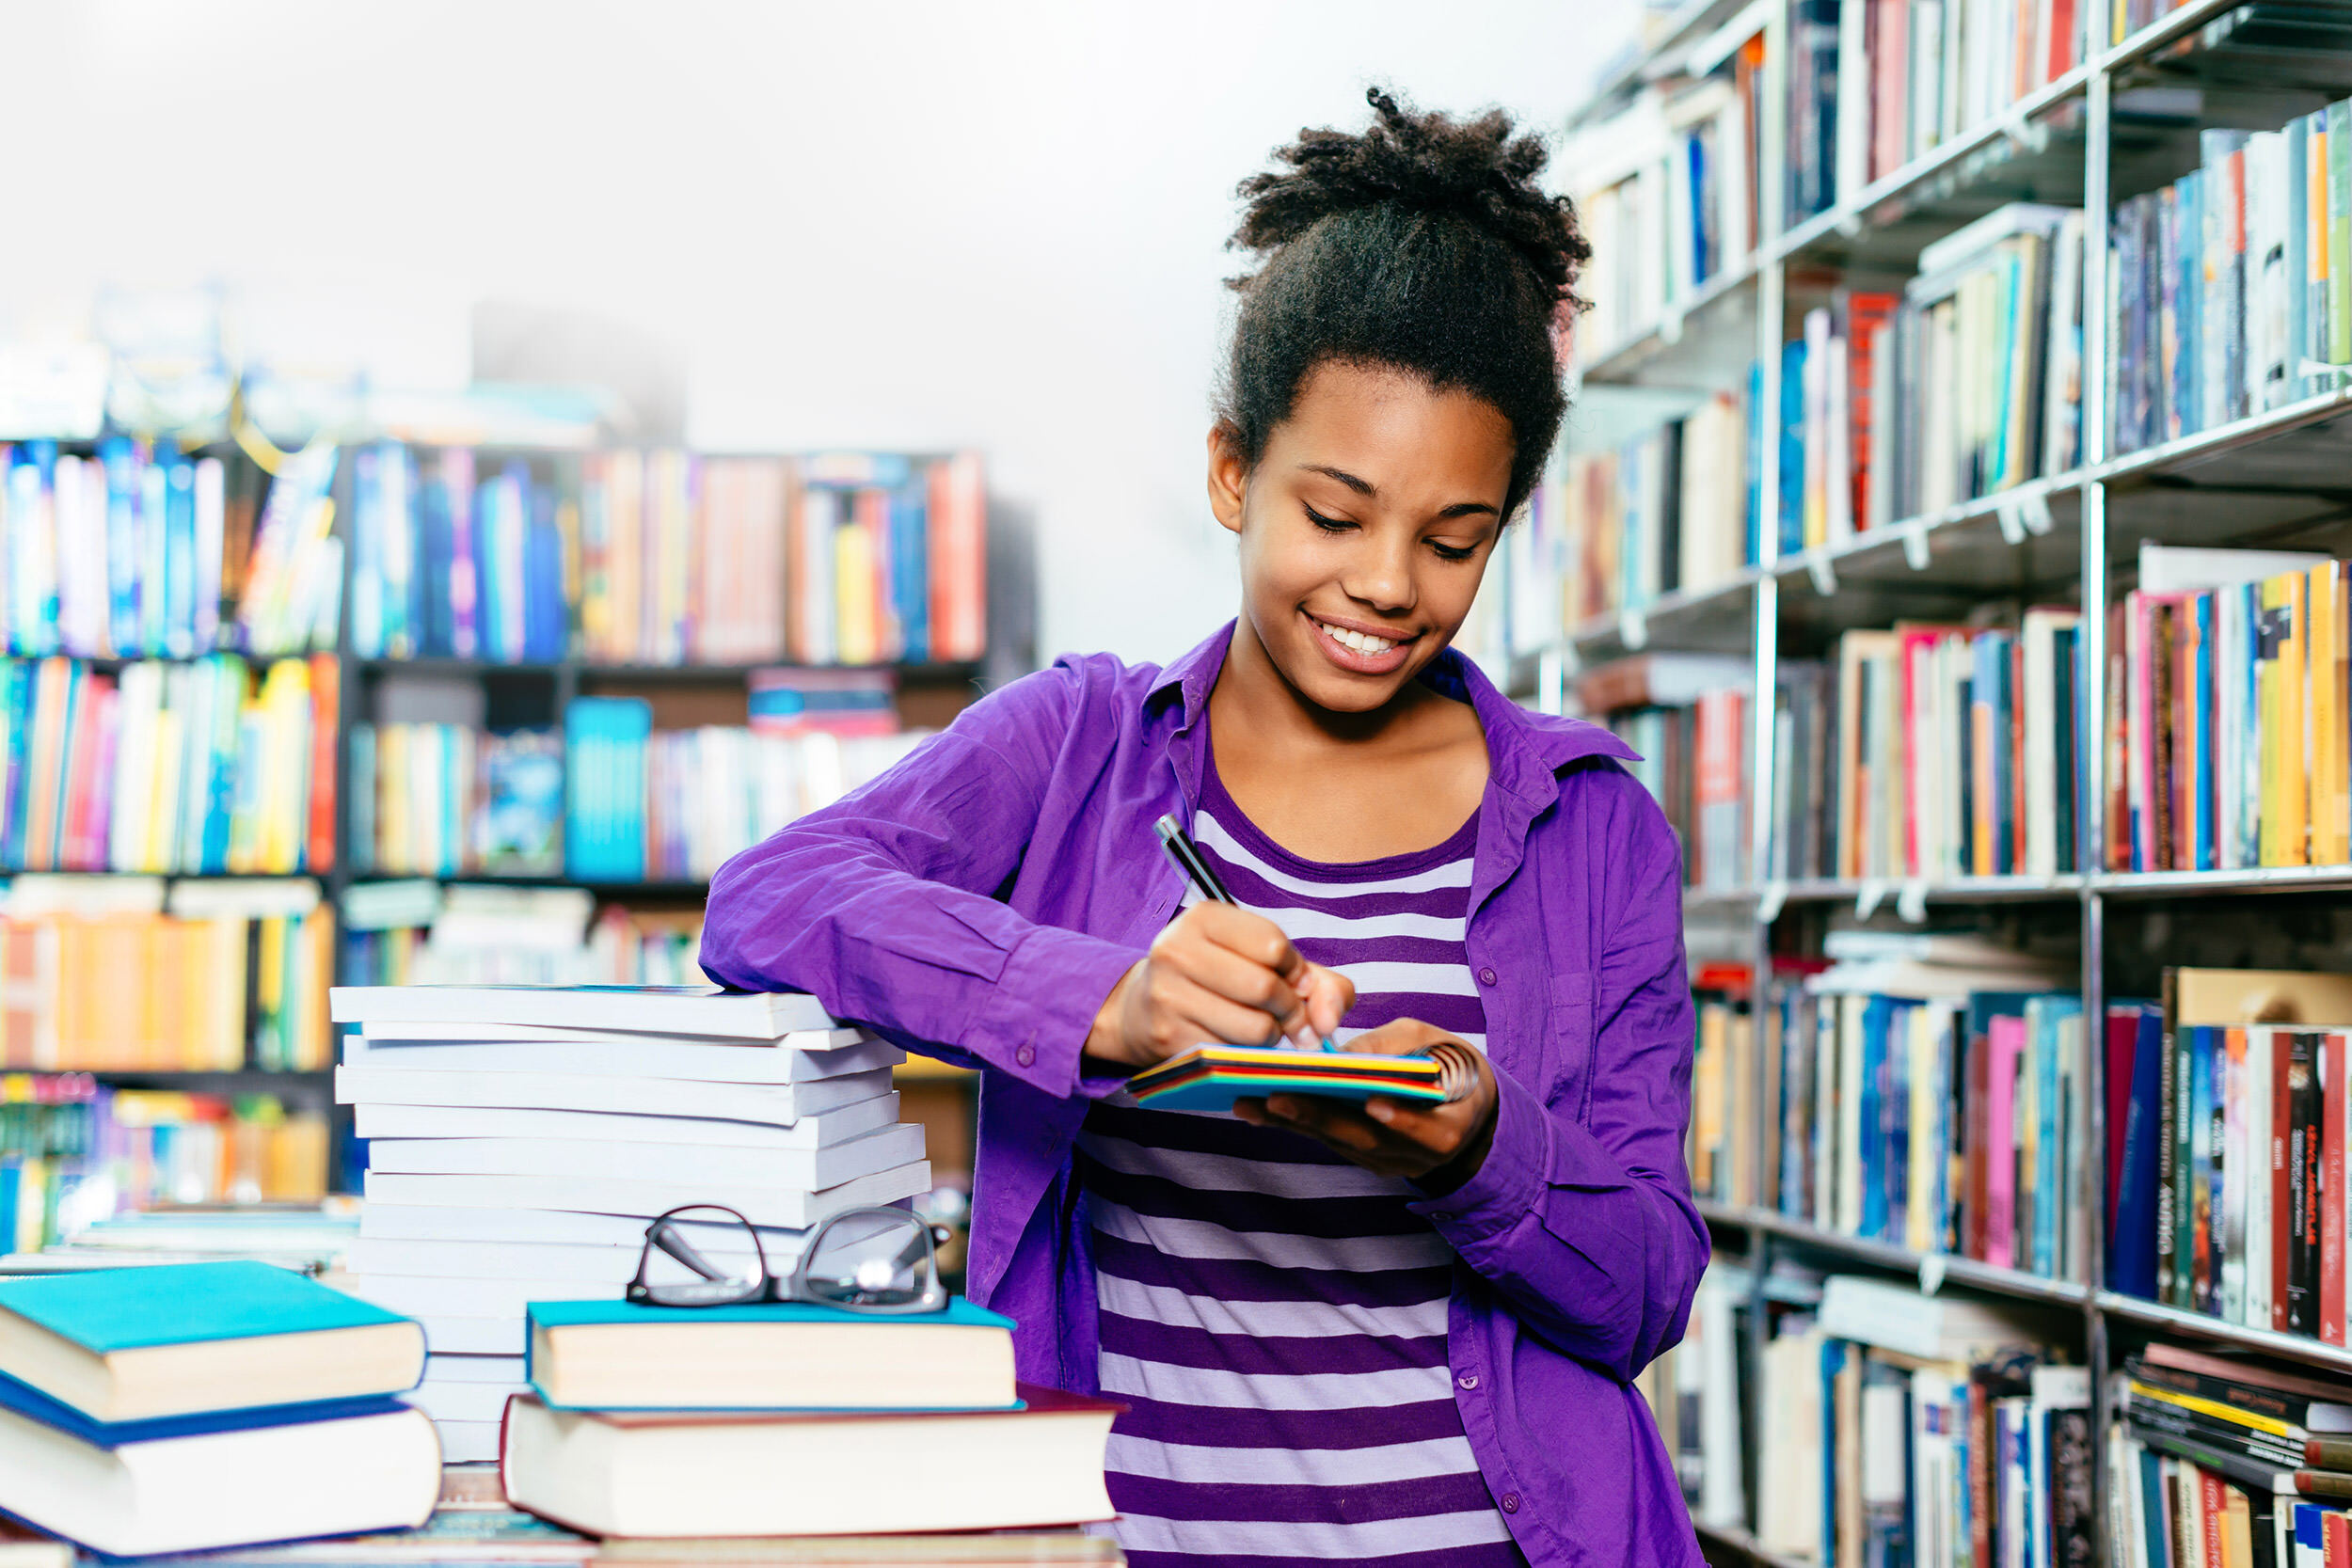 teens - a teenage girl surrounded by books, writing in a notepad